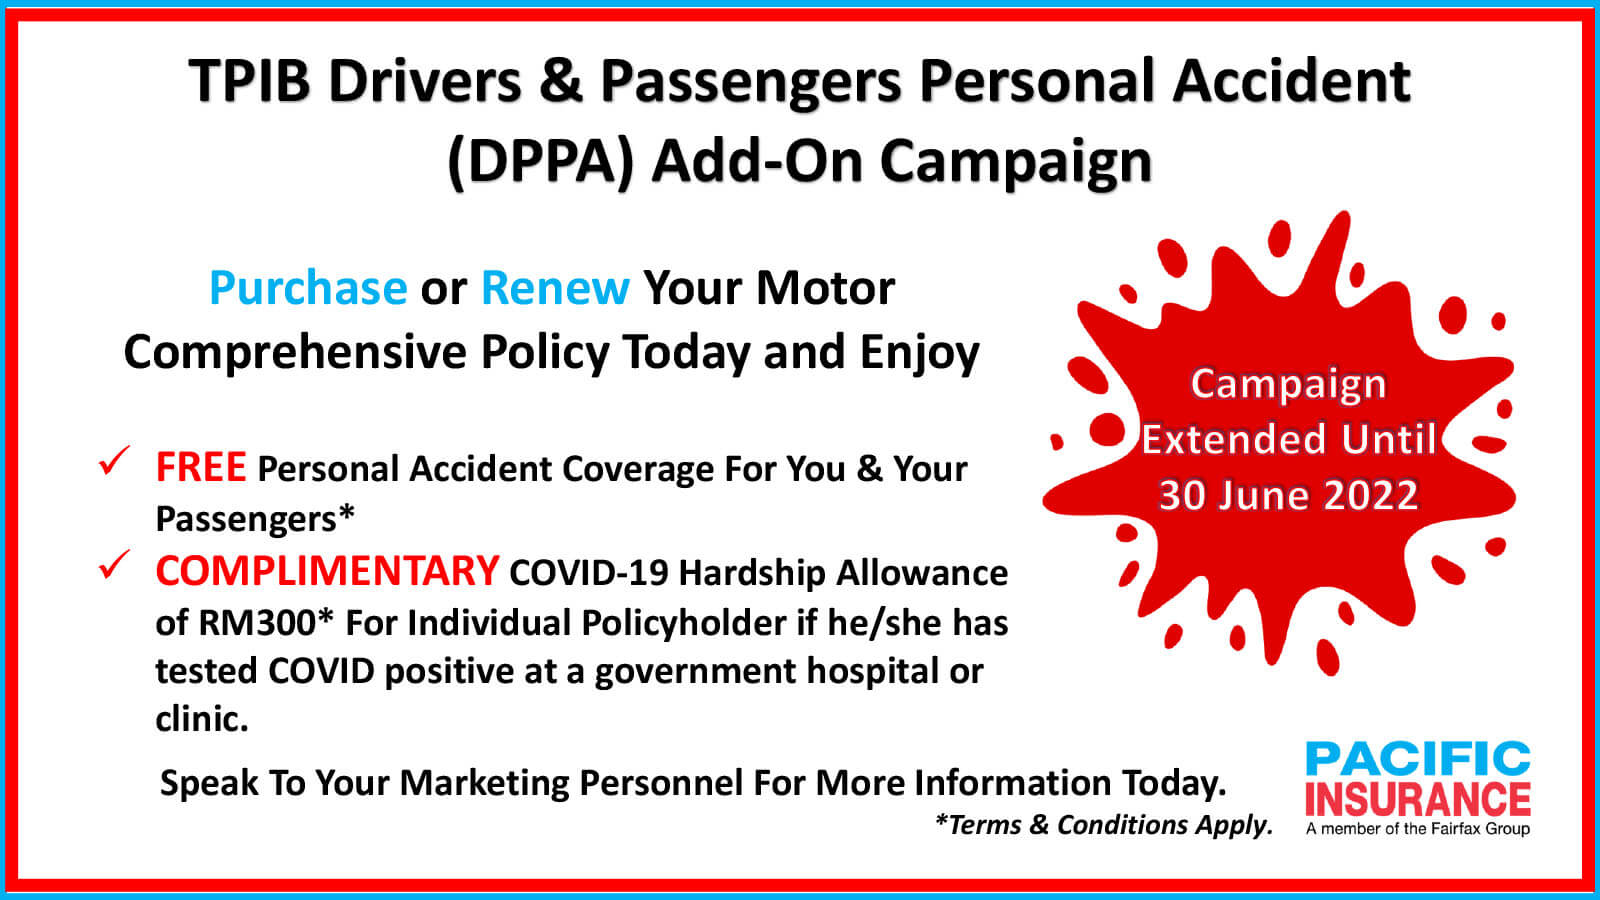 Extension of TPIB Free DPPA Campaign